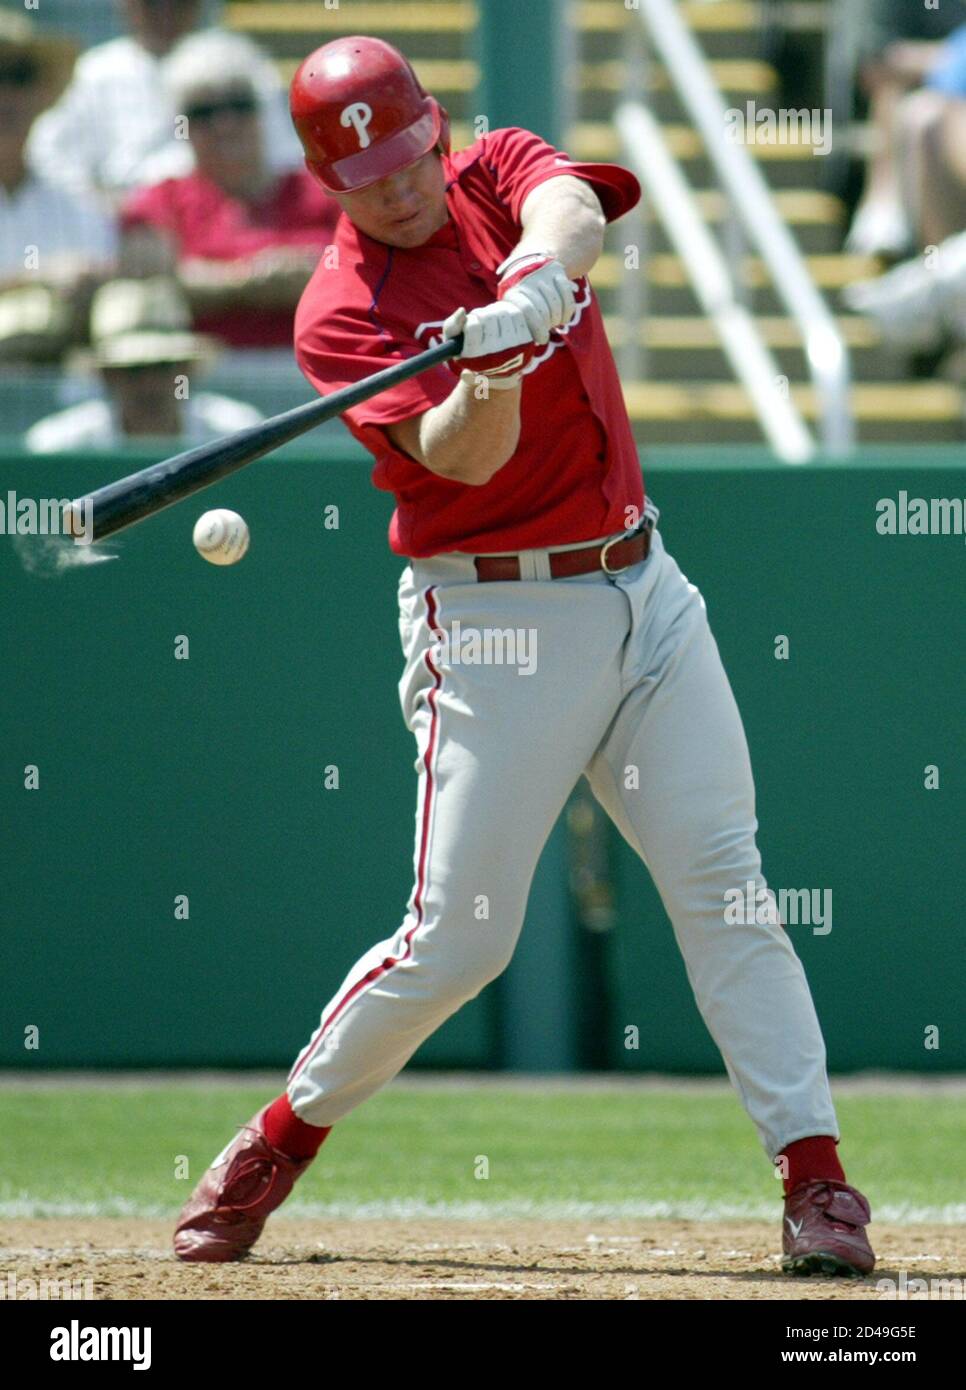 Philadelphia Phillies Russ Jacobson hits a two run single against the Minnesota Twins pitcher Rick Helling in the third inning, during Grapefruit League action in Ft. Myers, Florida, March 20, 2004. REUTERS/Marc Serota  MS Stock Photo